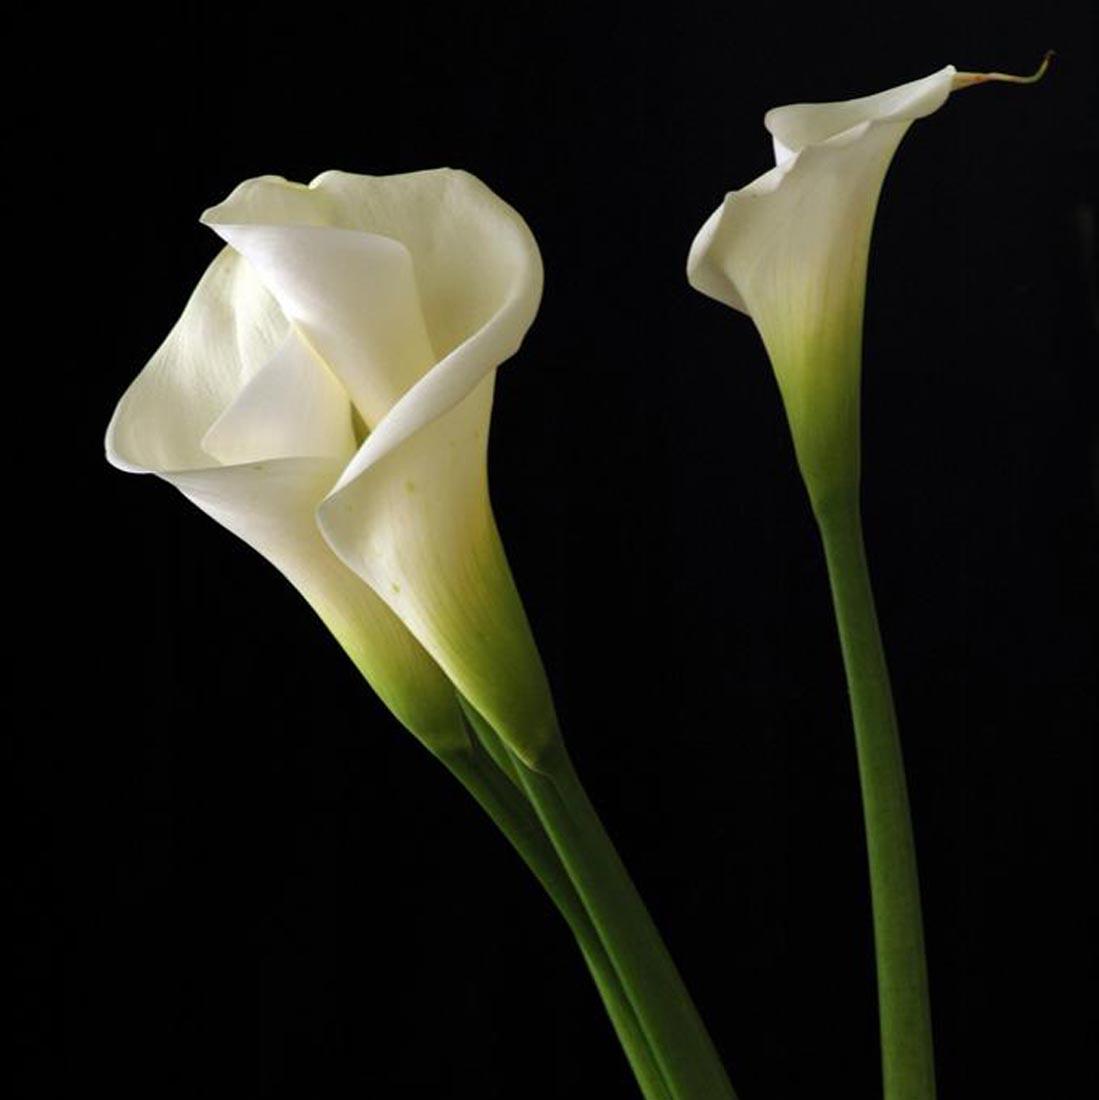 calla-lily-flowers-hd-wallpapers-cool-desktop-pictures-widescreen